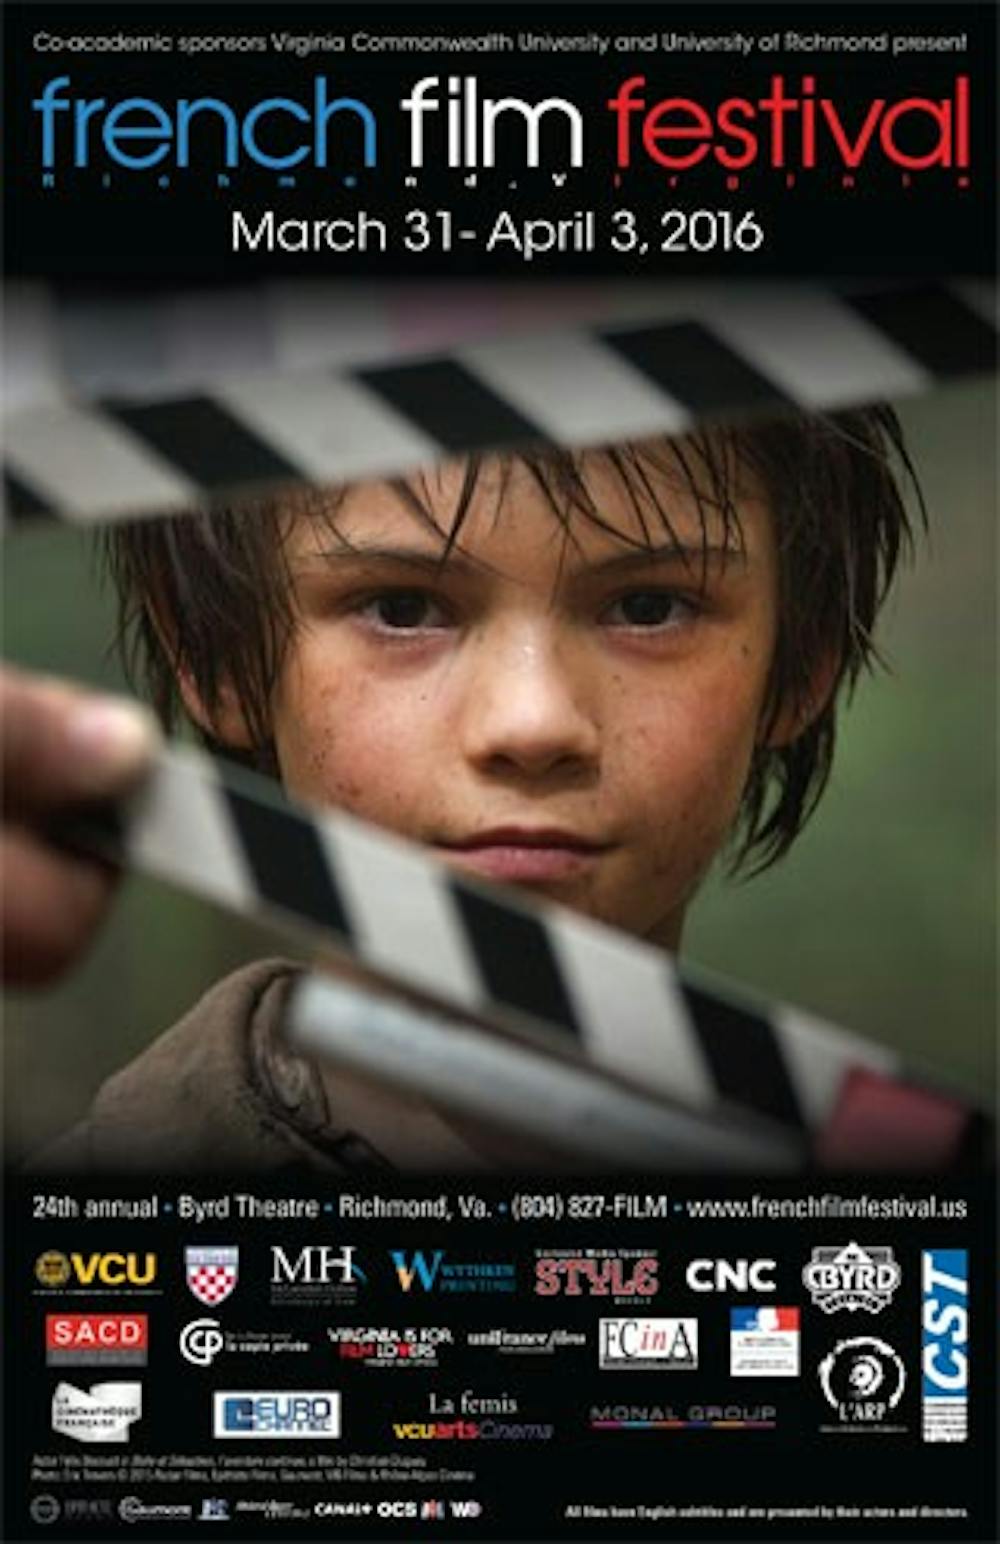 <p>The flyer for the 2016 French Film Festival. Photo courtesy of&nbsp;<a href="http://frenchfilmfestival.us/">the festival's website</a>.</p>